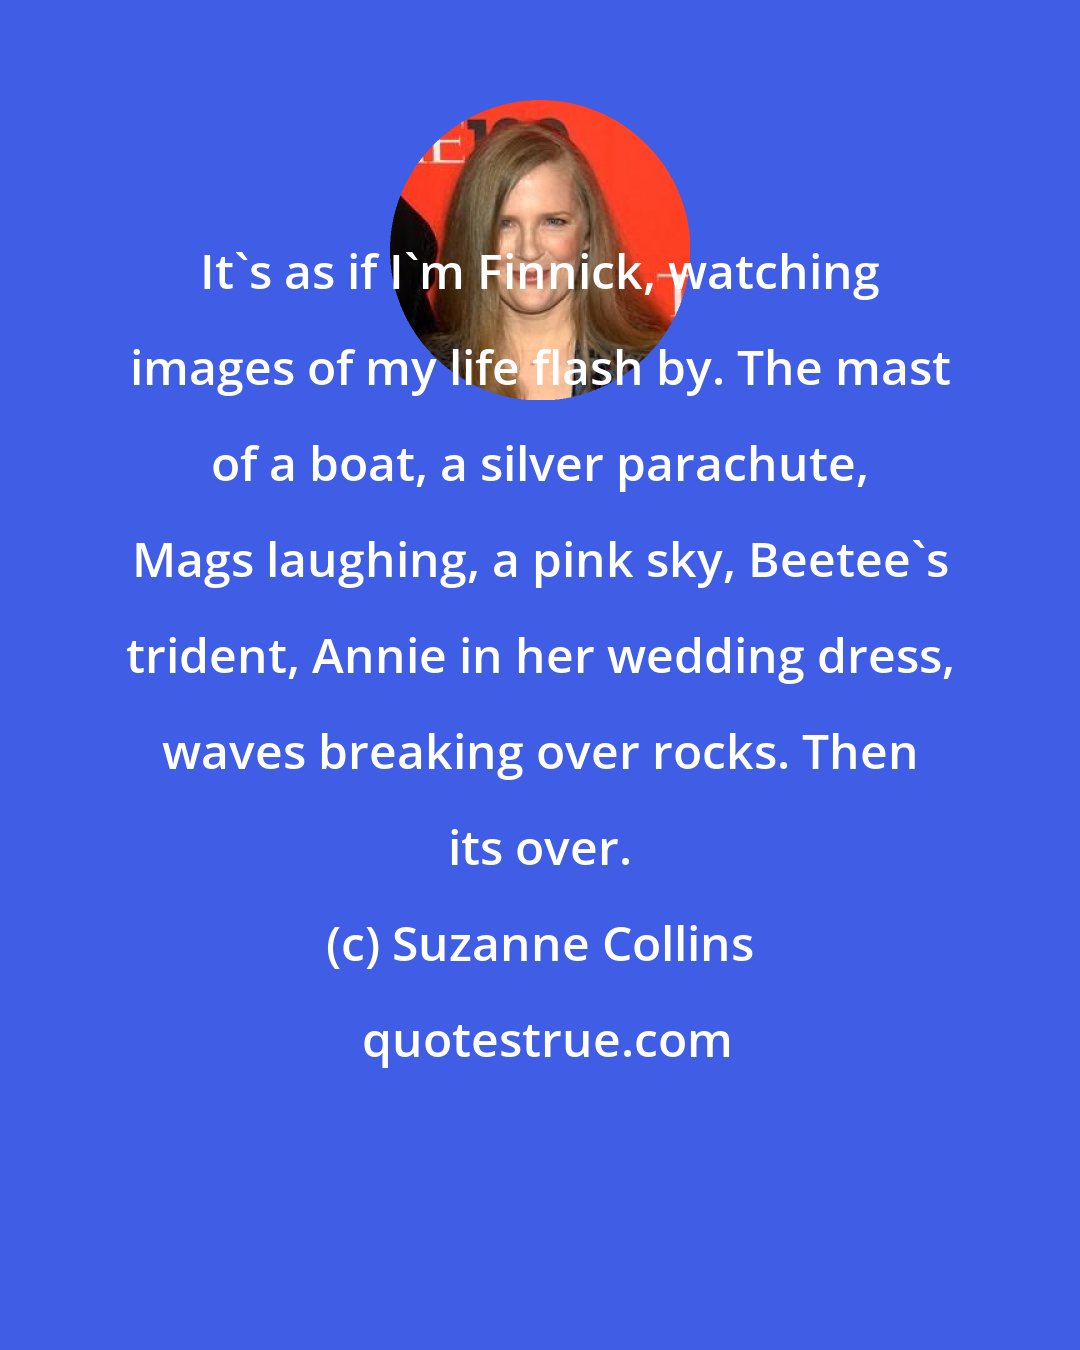 Suzanne Collins: It's as if I'm Finnick, watching images of my life flash by. The mast of a boat, a silver parachute, Mags laughing, a pink sky, Beetee's trident, Annie in her wedding dress, waves breaking over rocks. Then its over.